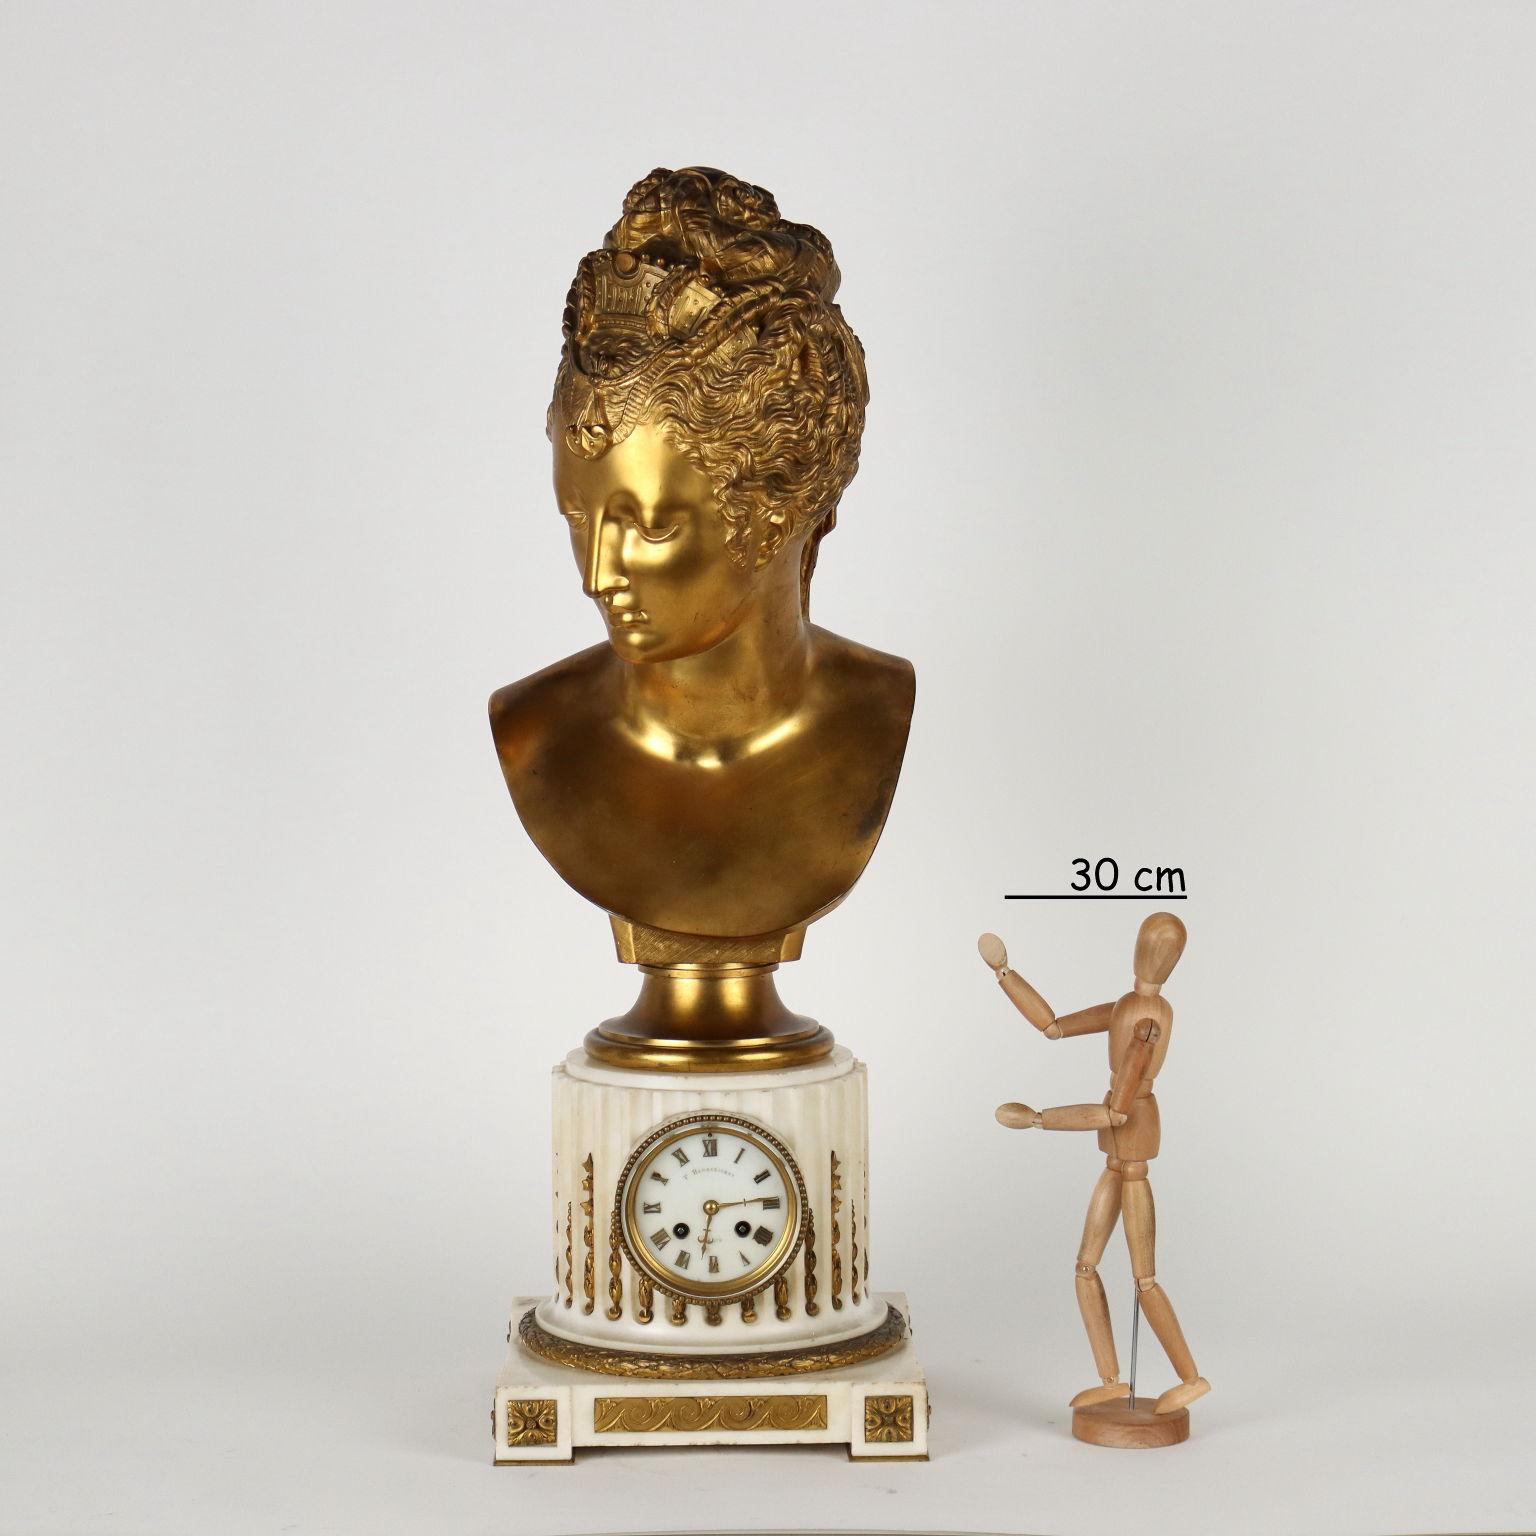 Ferdinand Barbedienne table clock in white marble and gilt bronze. The clock is set inside a fluted column in white marble and rests on a square base. The gilt bronze decorations are with vegetable and Greek motifs and a laurel wreath surrounds the